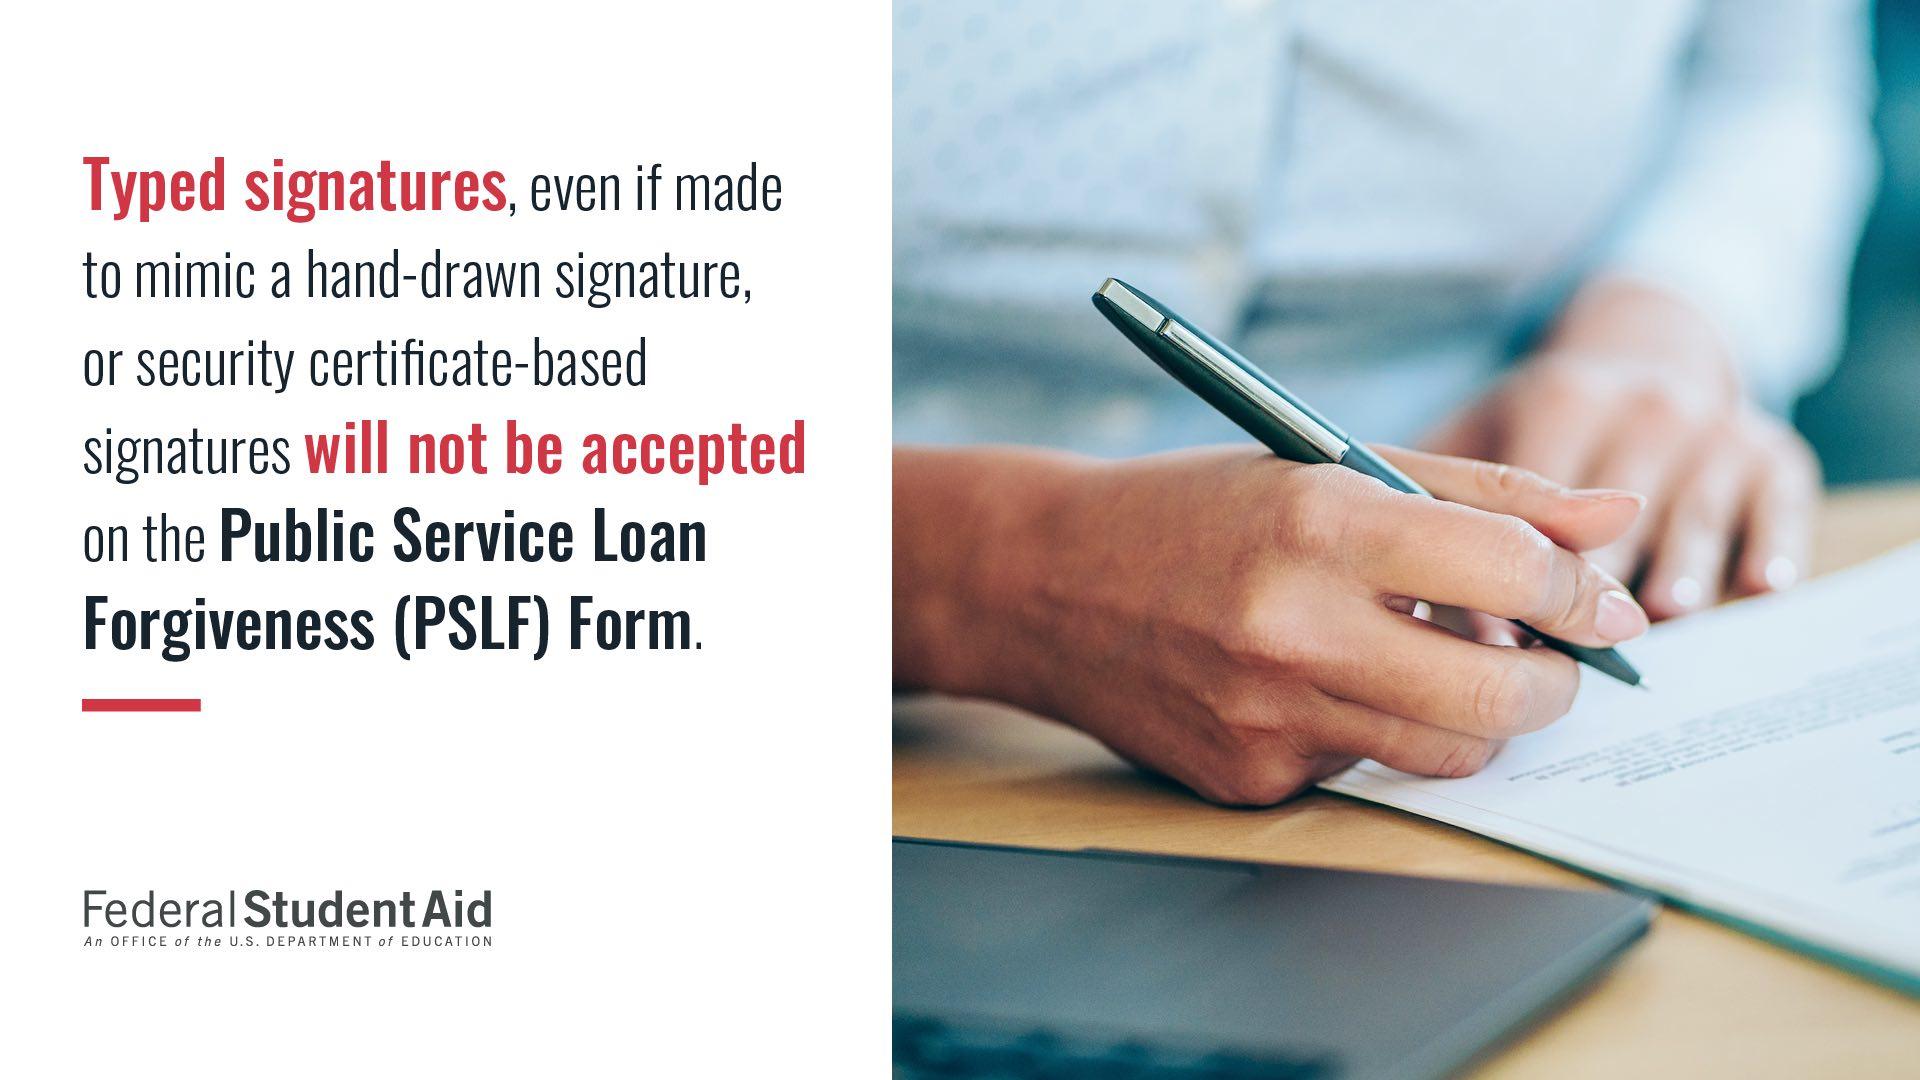 Federal Student Aid As A Reminder You Must Verify Your Employer S Eligibility Using The Pslf Employer Search This Search Function Is Found On The Resource Section Of The Pslf Landing